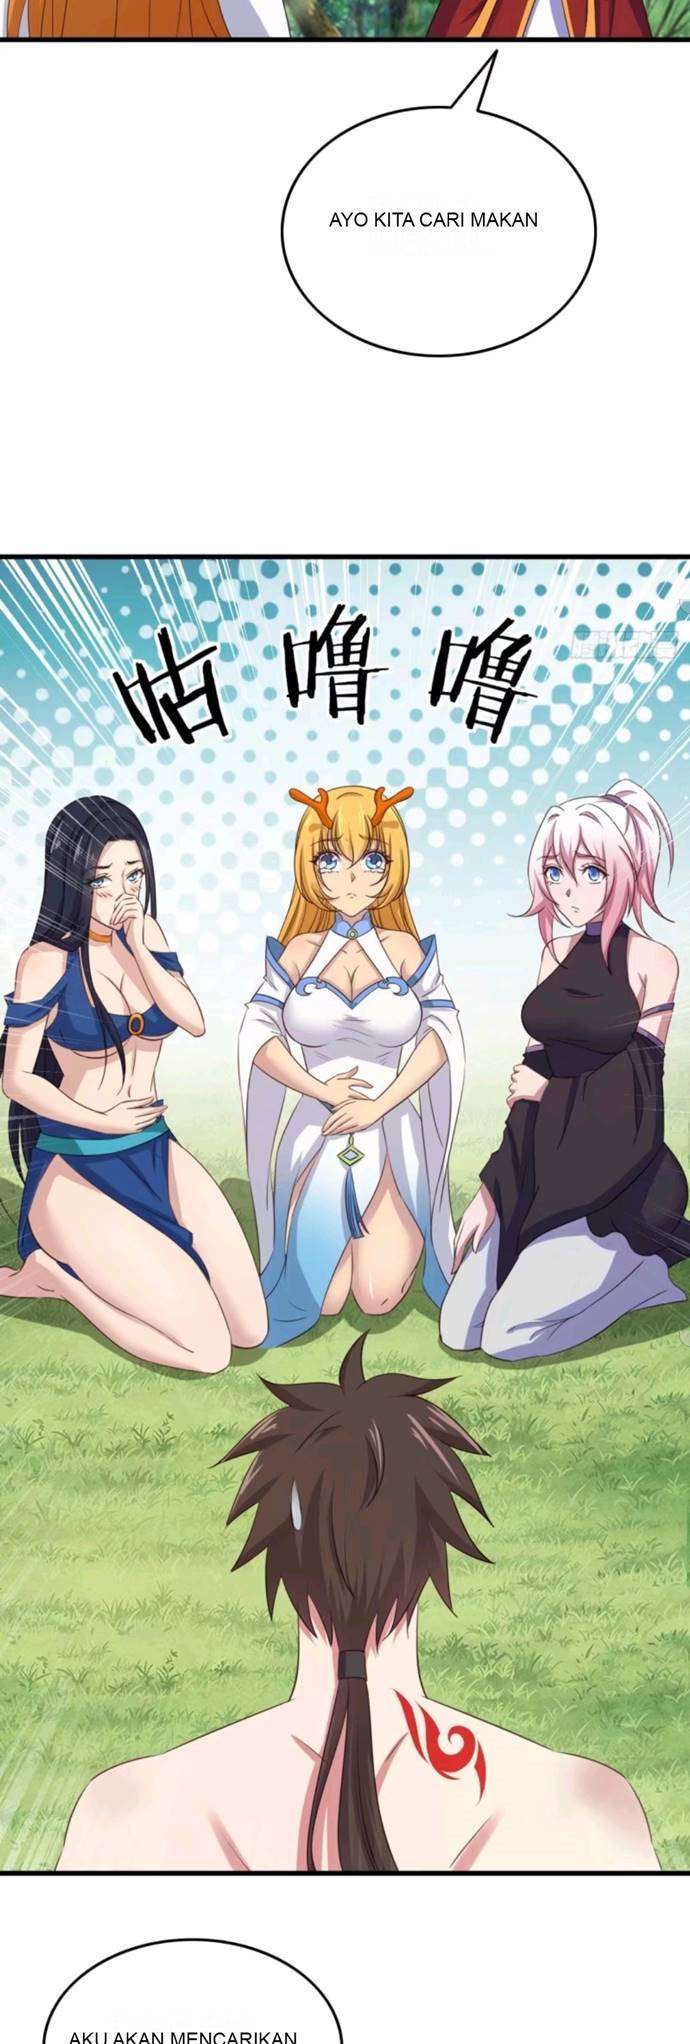 My Harem Depend on Drawing Cards Chapter 71